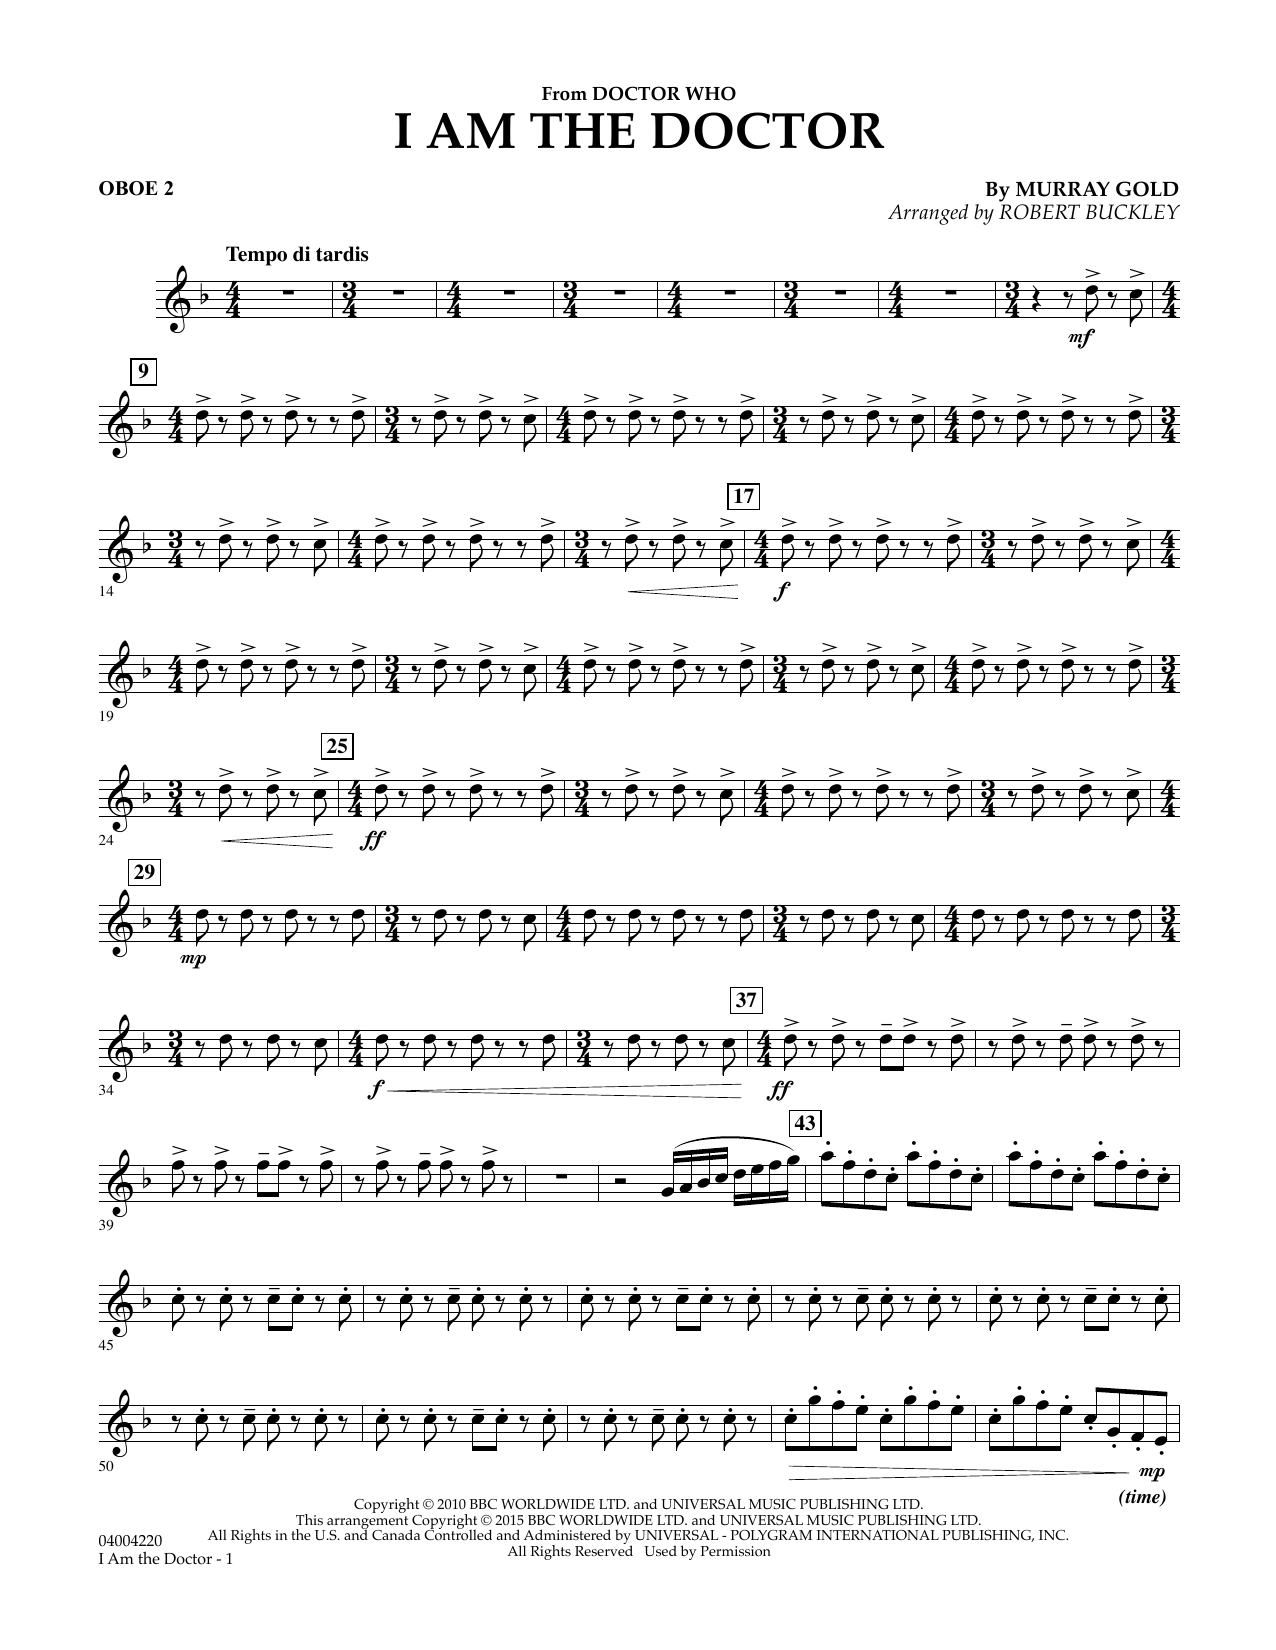 Robert Buckley I Am the Doctor (from Doctor Who) - Oboe 2 sheet music notes and chords. Download Printable PDF.